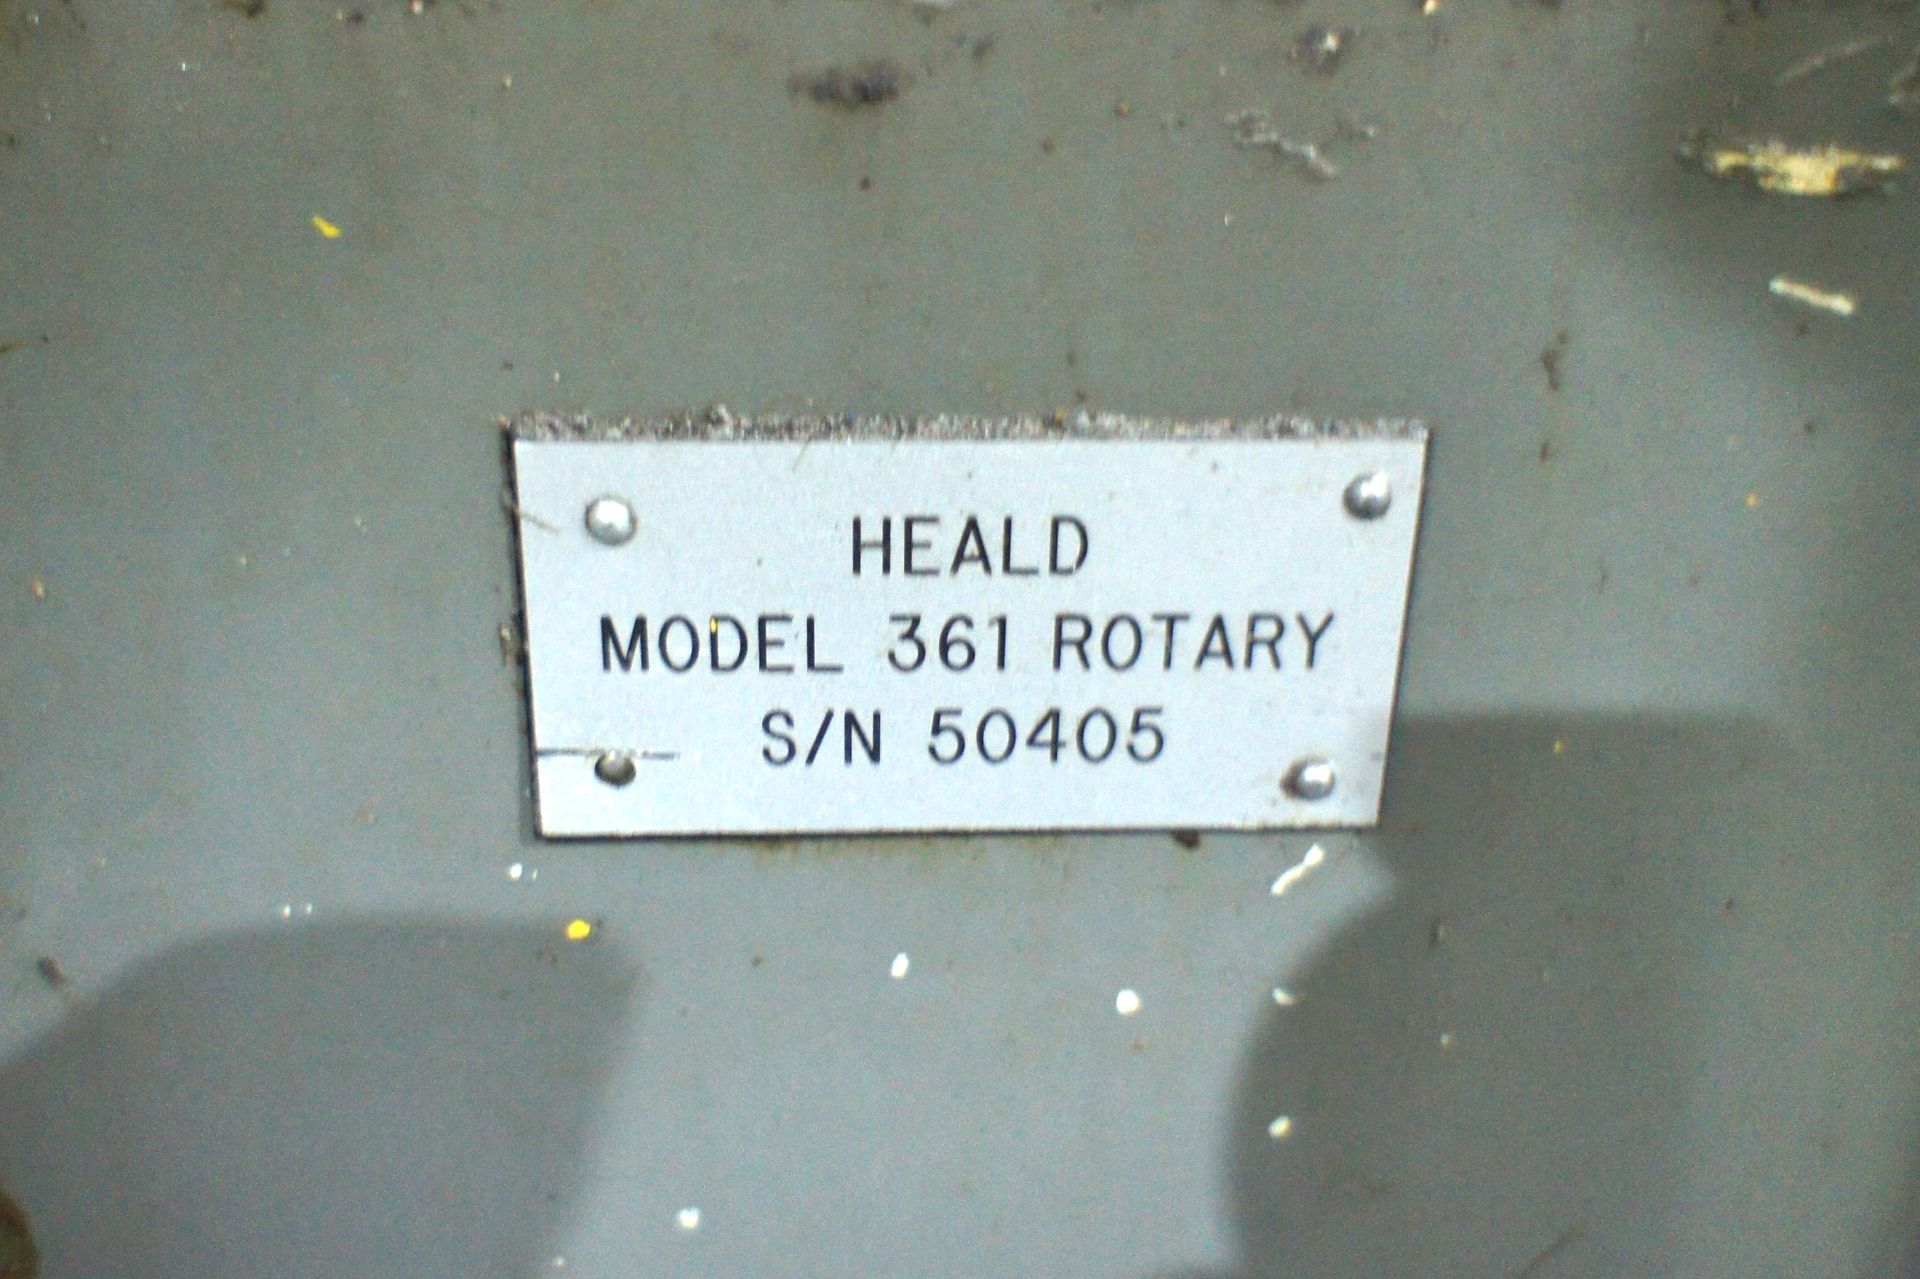 Heald 361 rotary surface grinder - Image 6 of 7